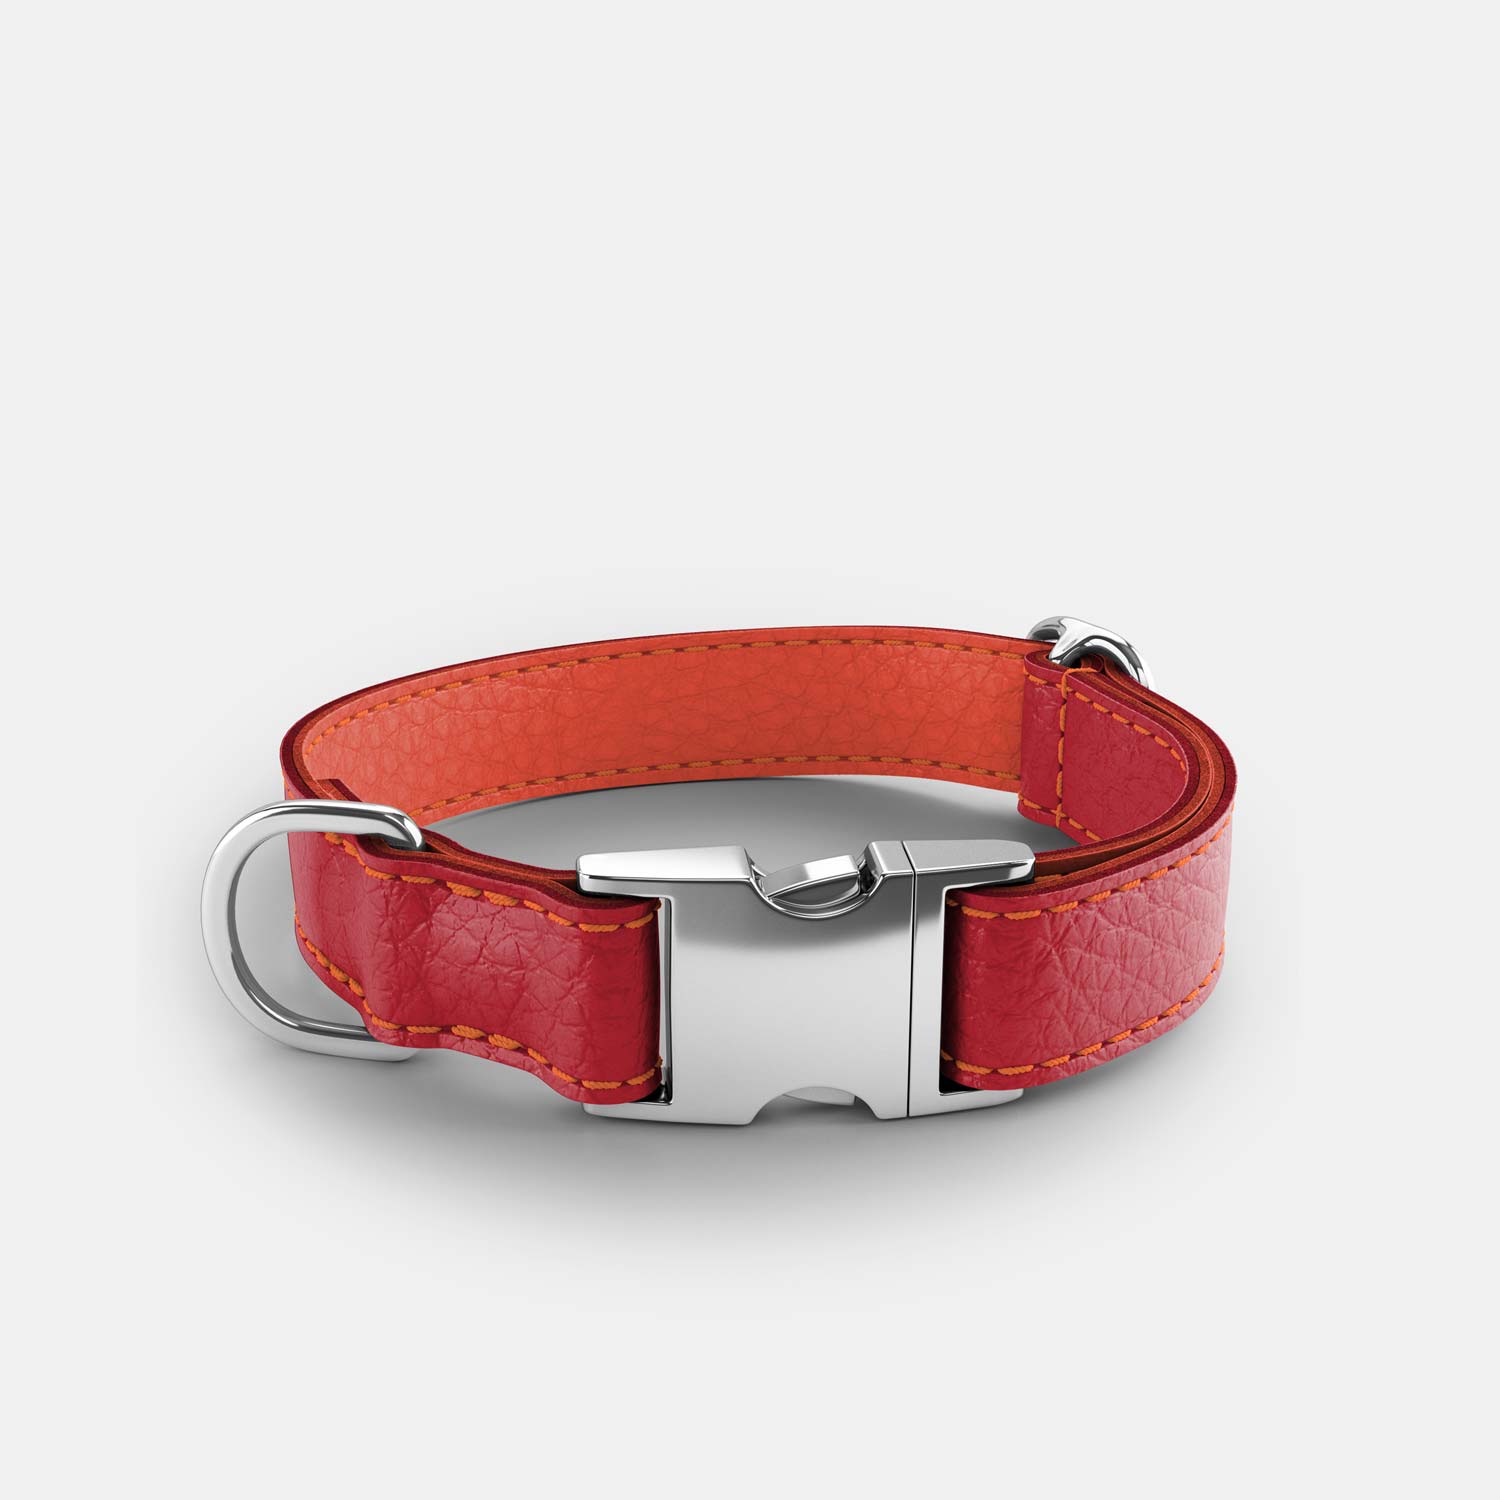 Leather Dog Collar - Red and Coral - RYAN London